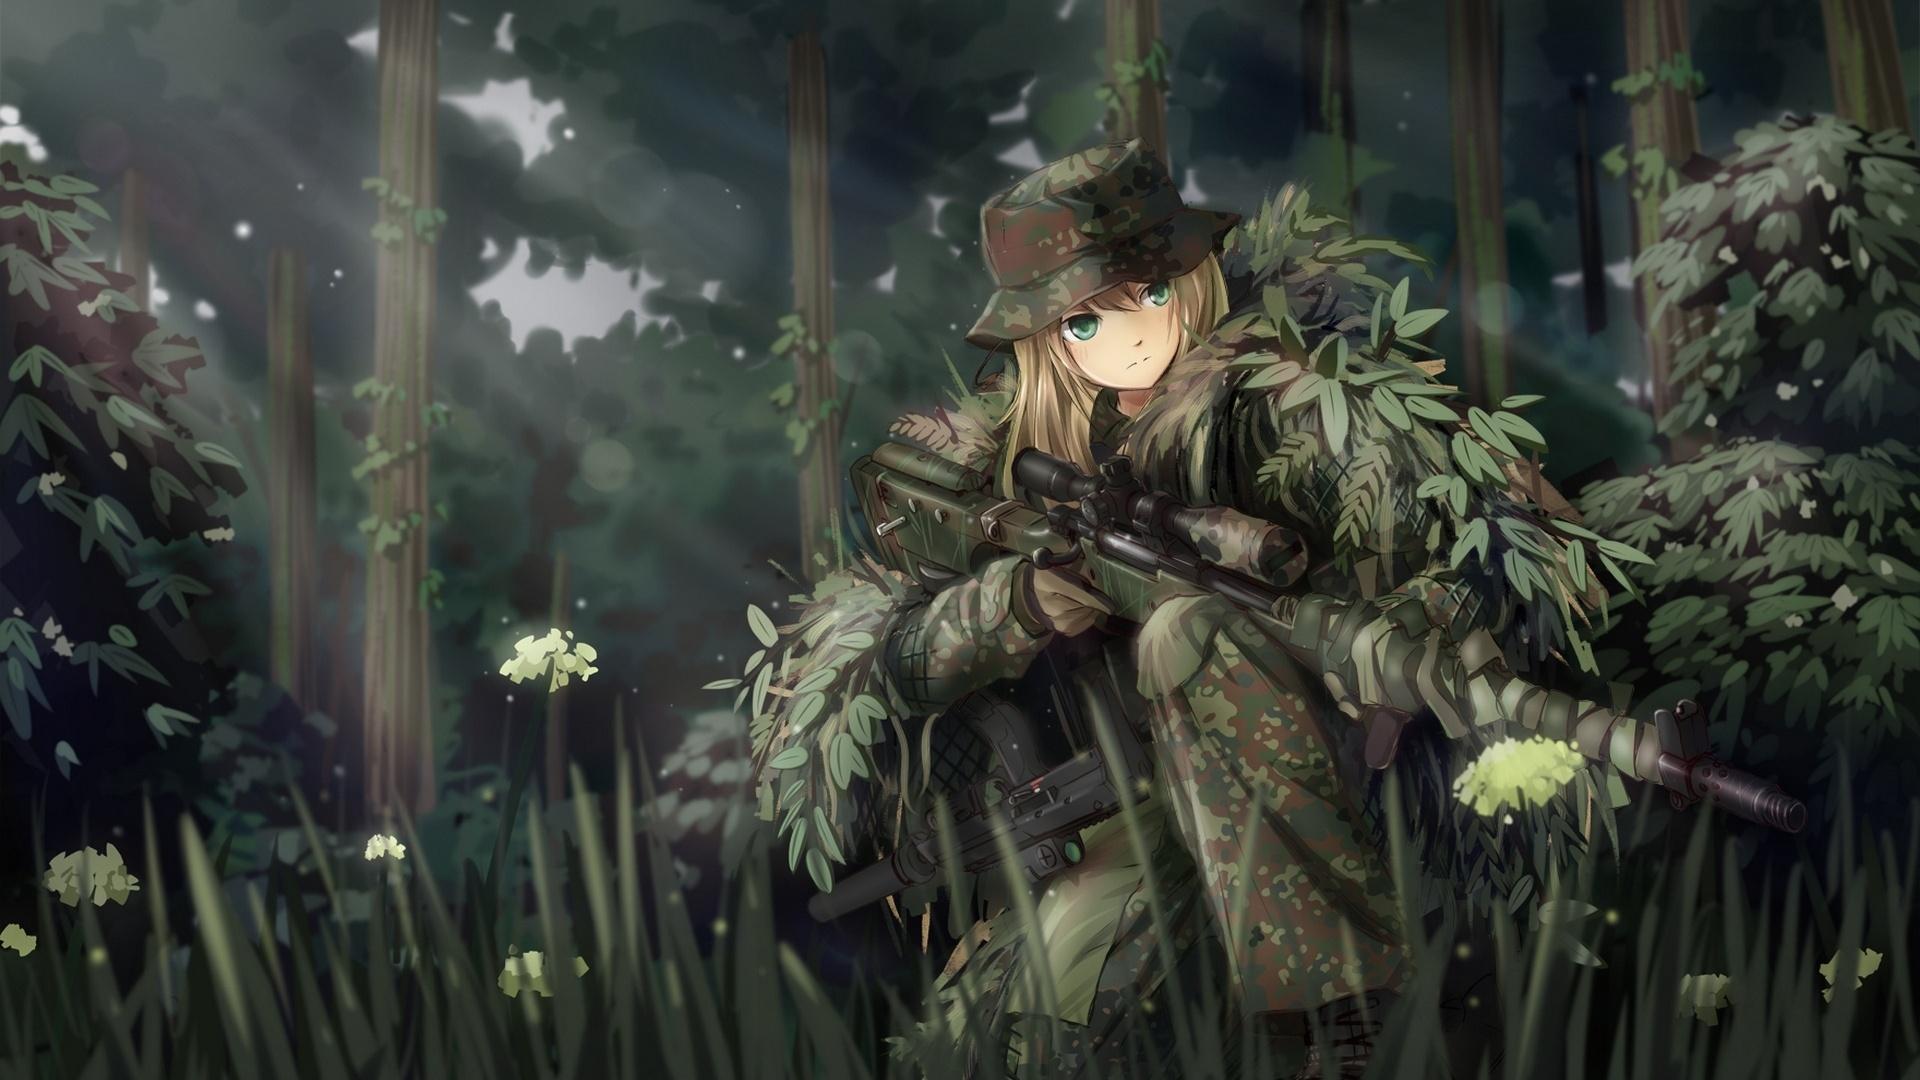 Desktop Wallpaper Snipers Soldiers military disguise 1920x1080